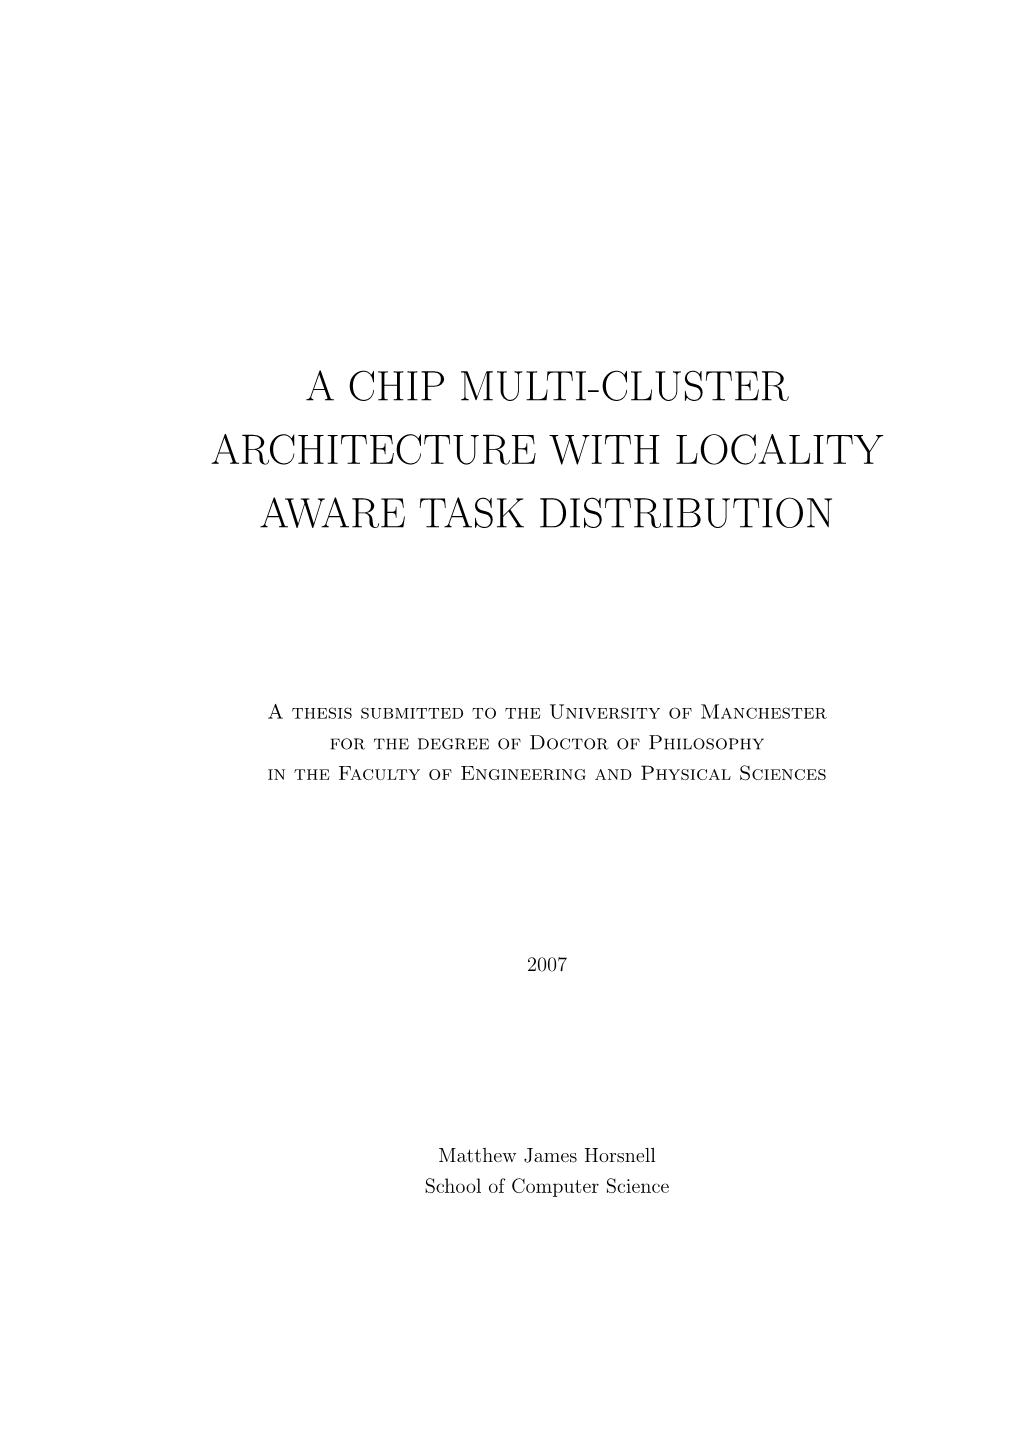 A Chip Multi-Cluster Architecture with Locality Aware Task Distribution